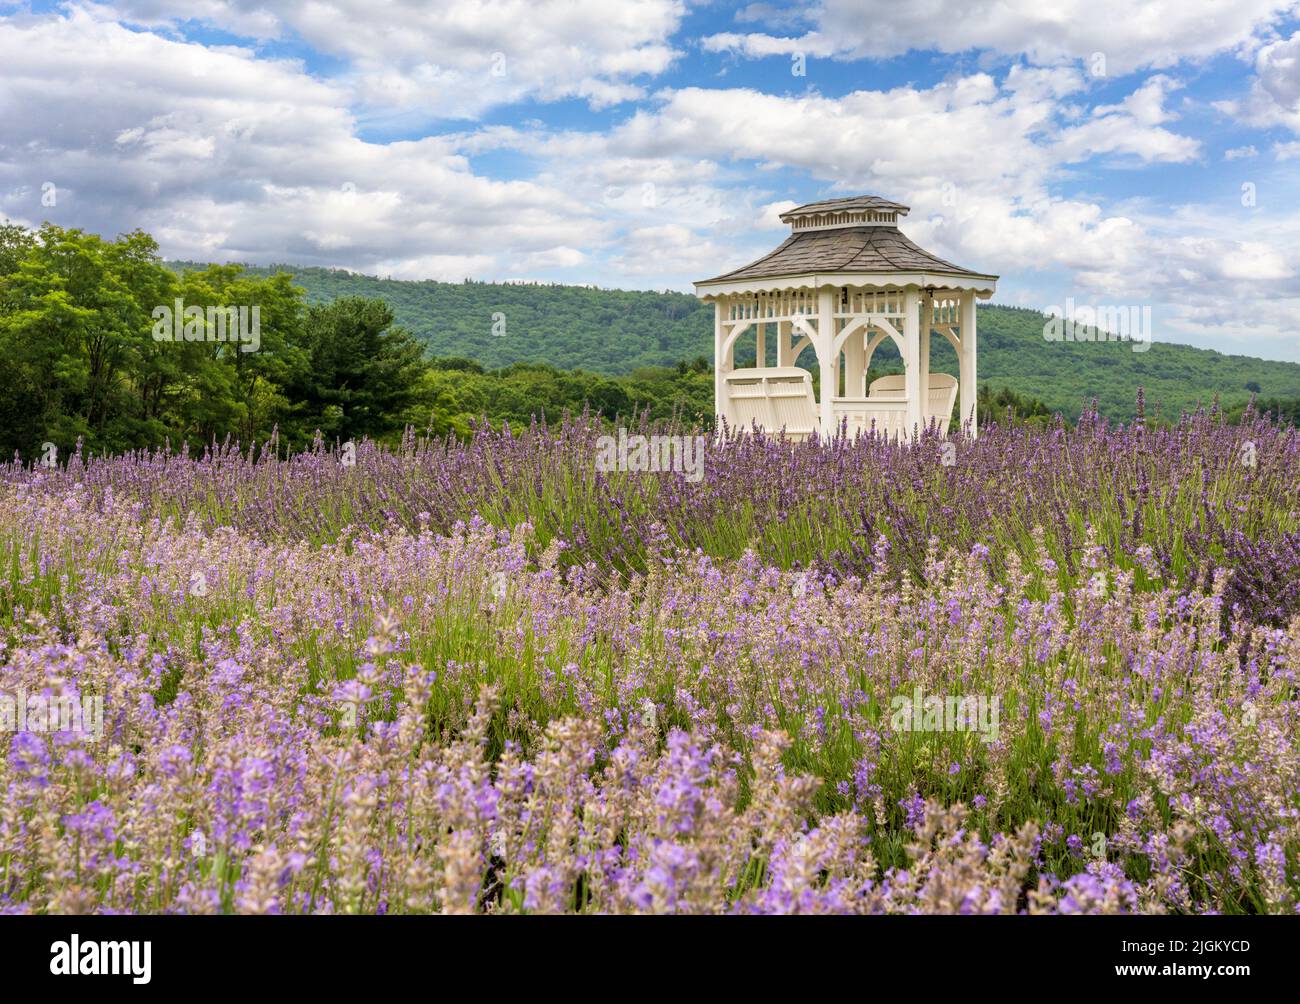 Lavender plants in blossom cultivated in a small farm in Maryland with white gazebo offering shade and relaxation Stock Photo